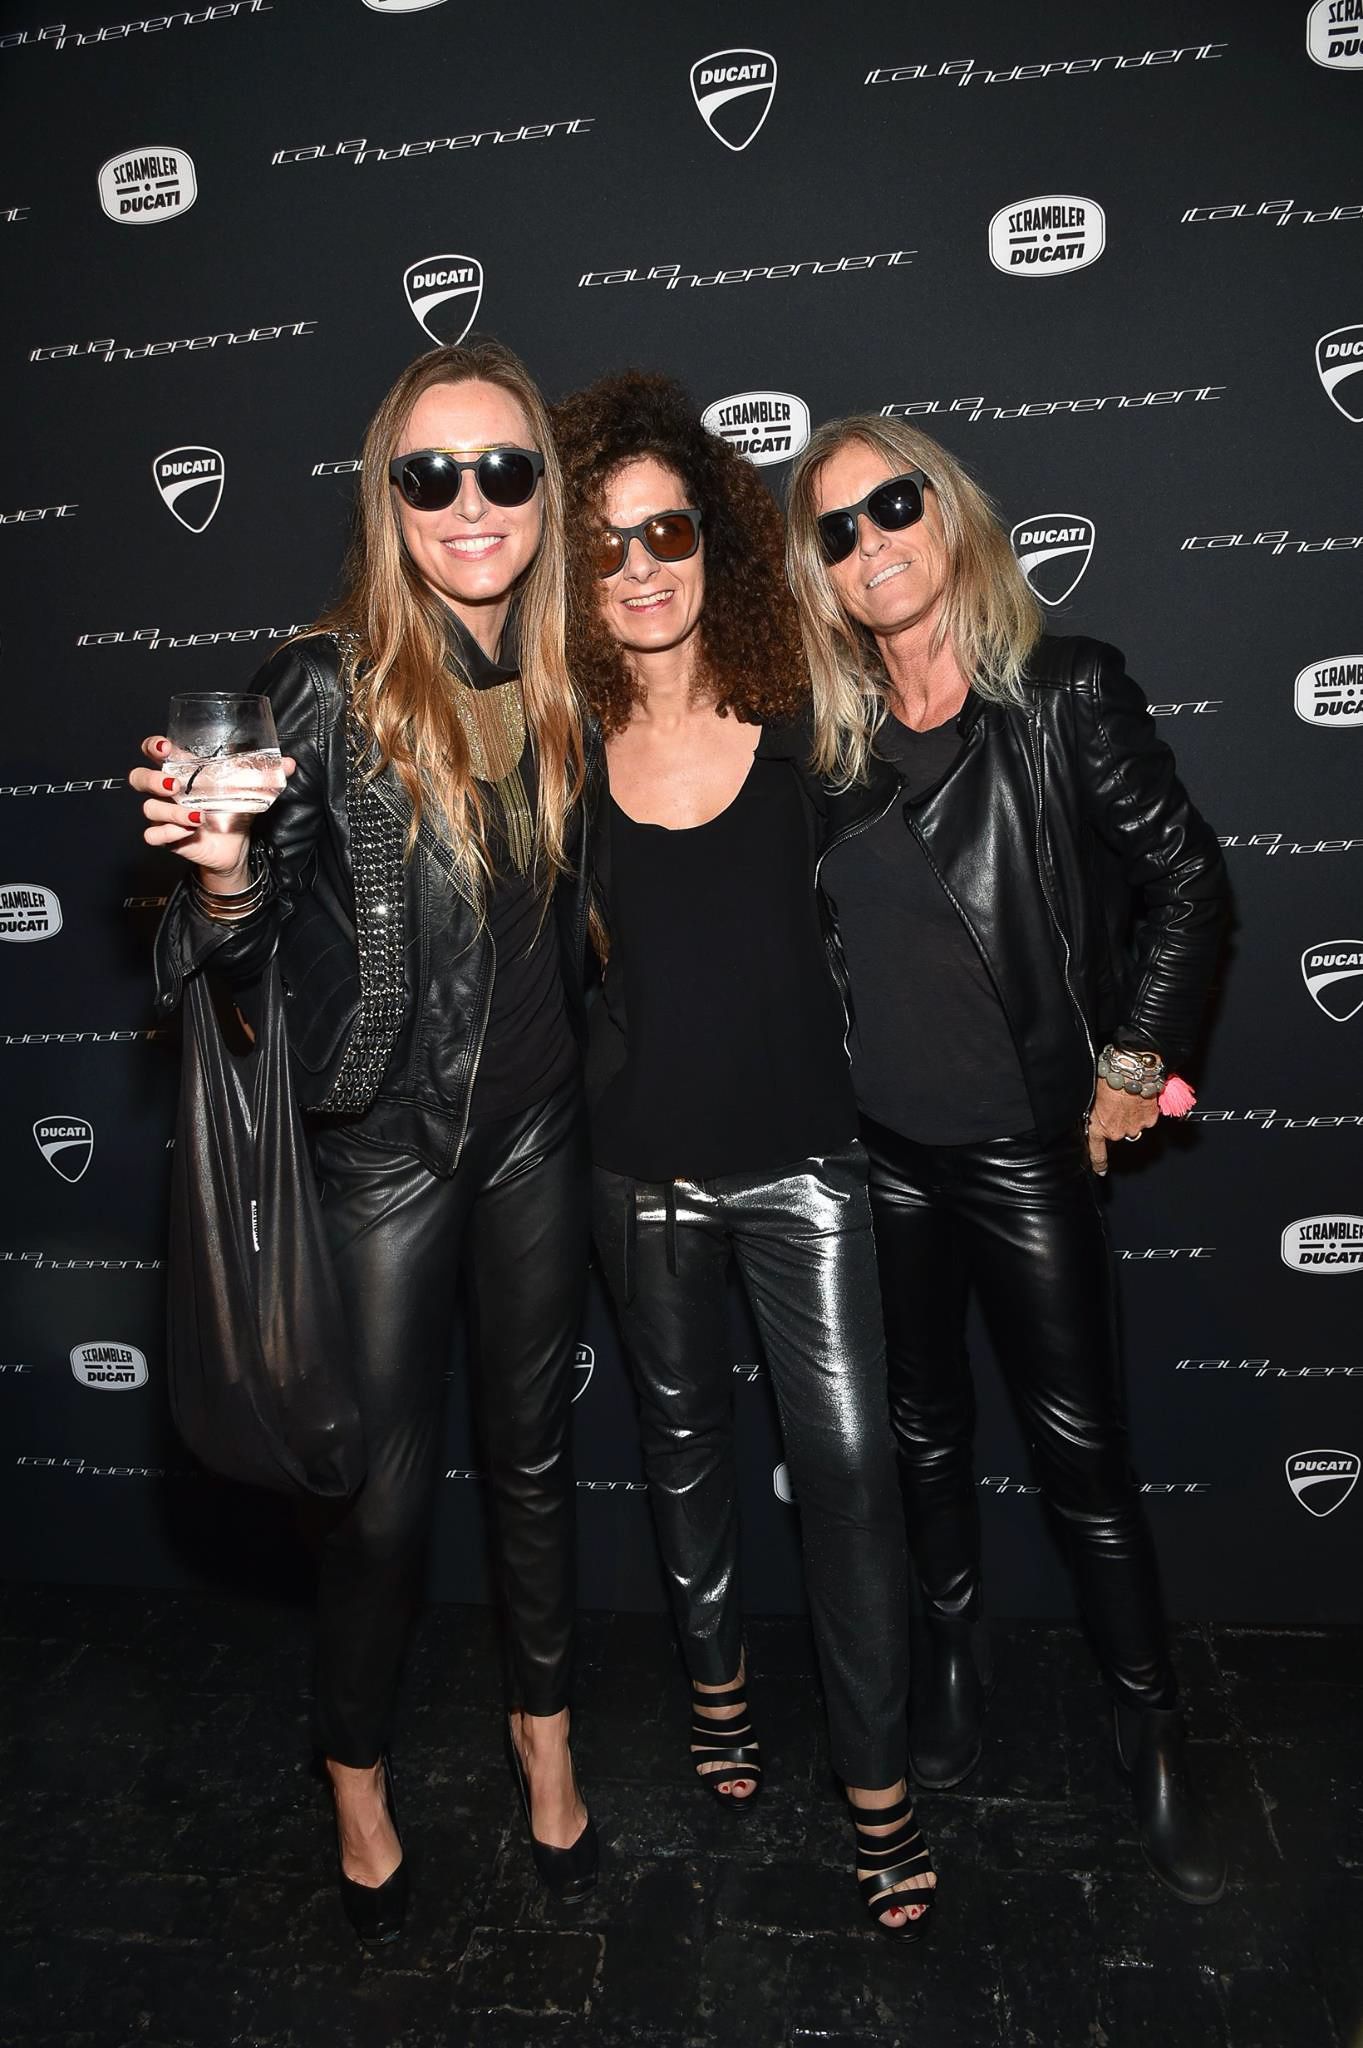 Ladies in leathers at the Ducati Scrambler Italia Independent launch in Miami, Monday December 7th, 2015